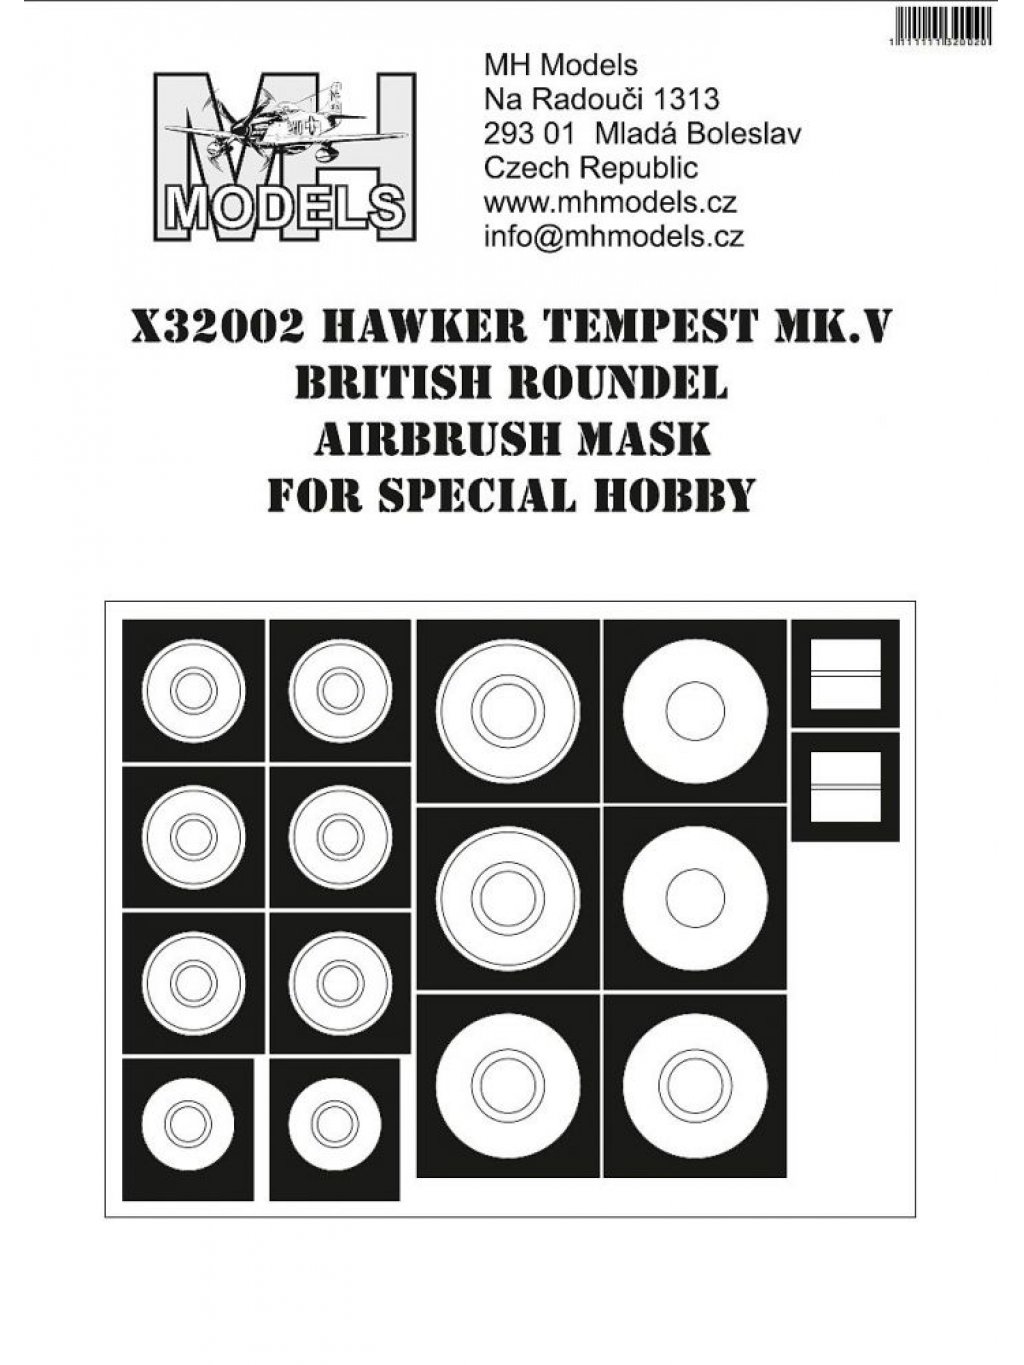 Hawker Tempest Mk.V British roundel airbrush mask for Special Hobby